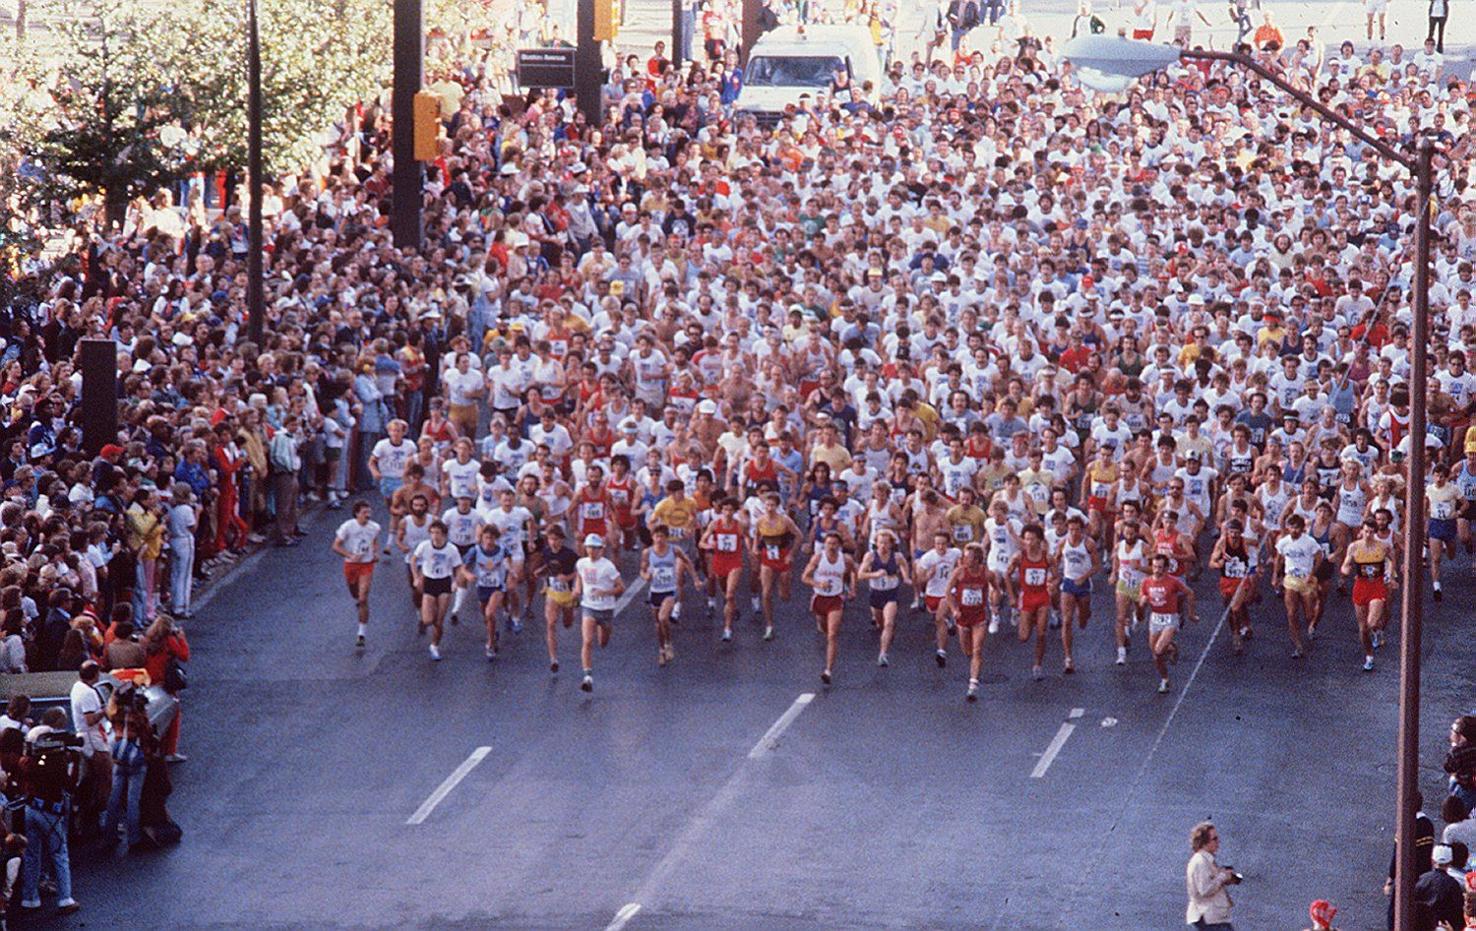 Throwback Tulsa 40+ years of the Tulsa Run, which began on this day in